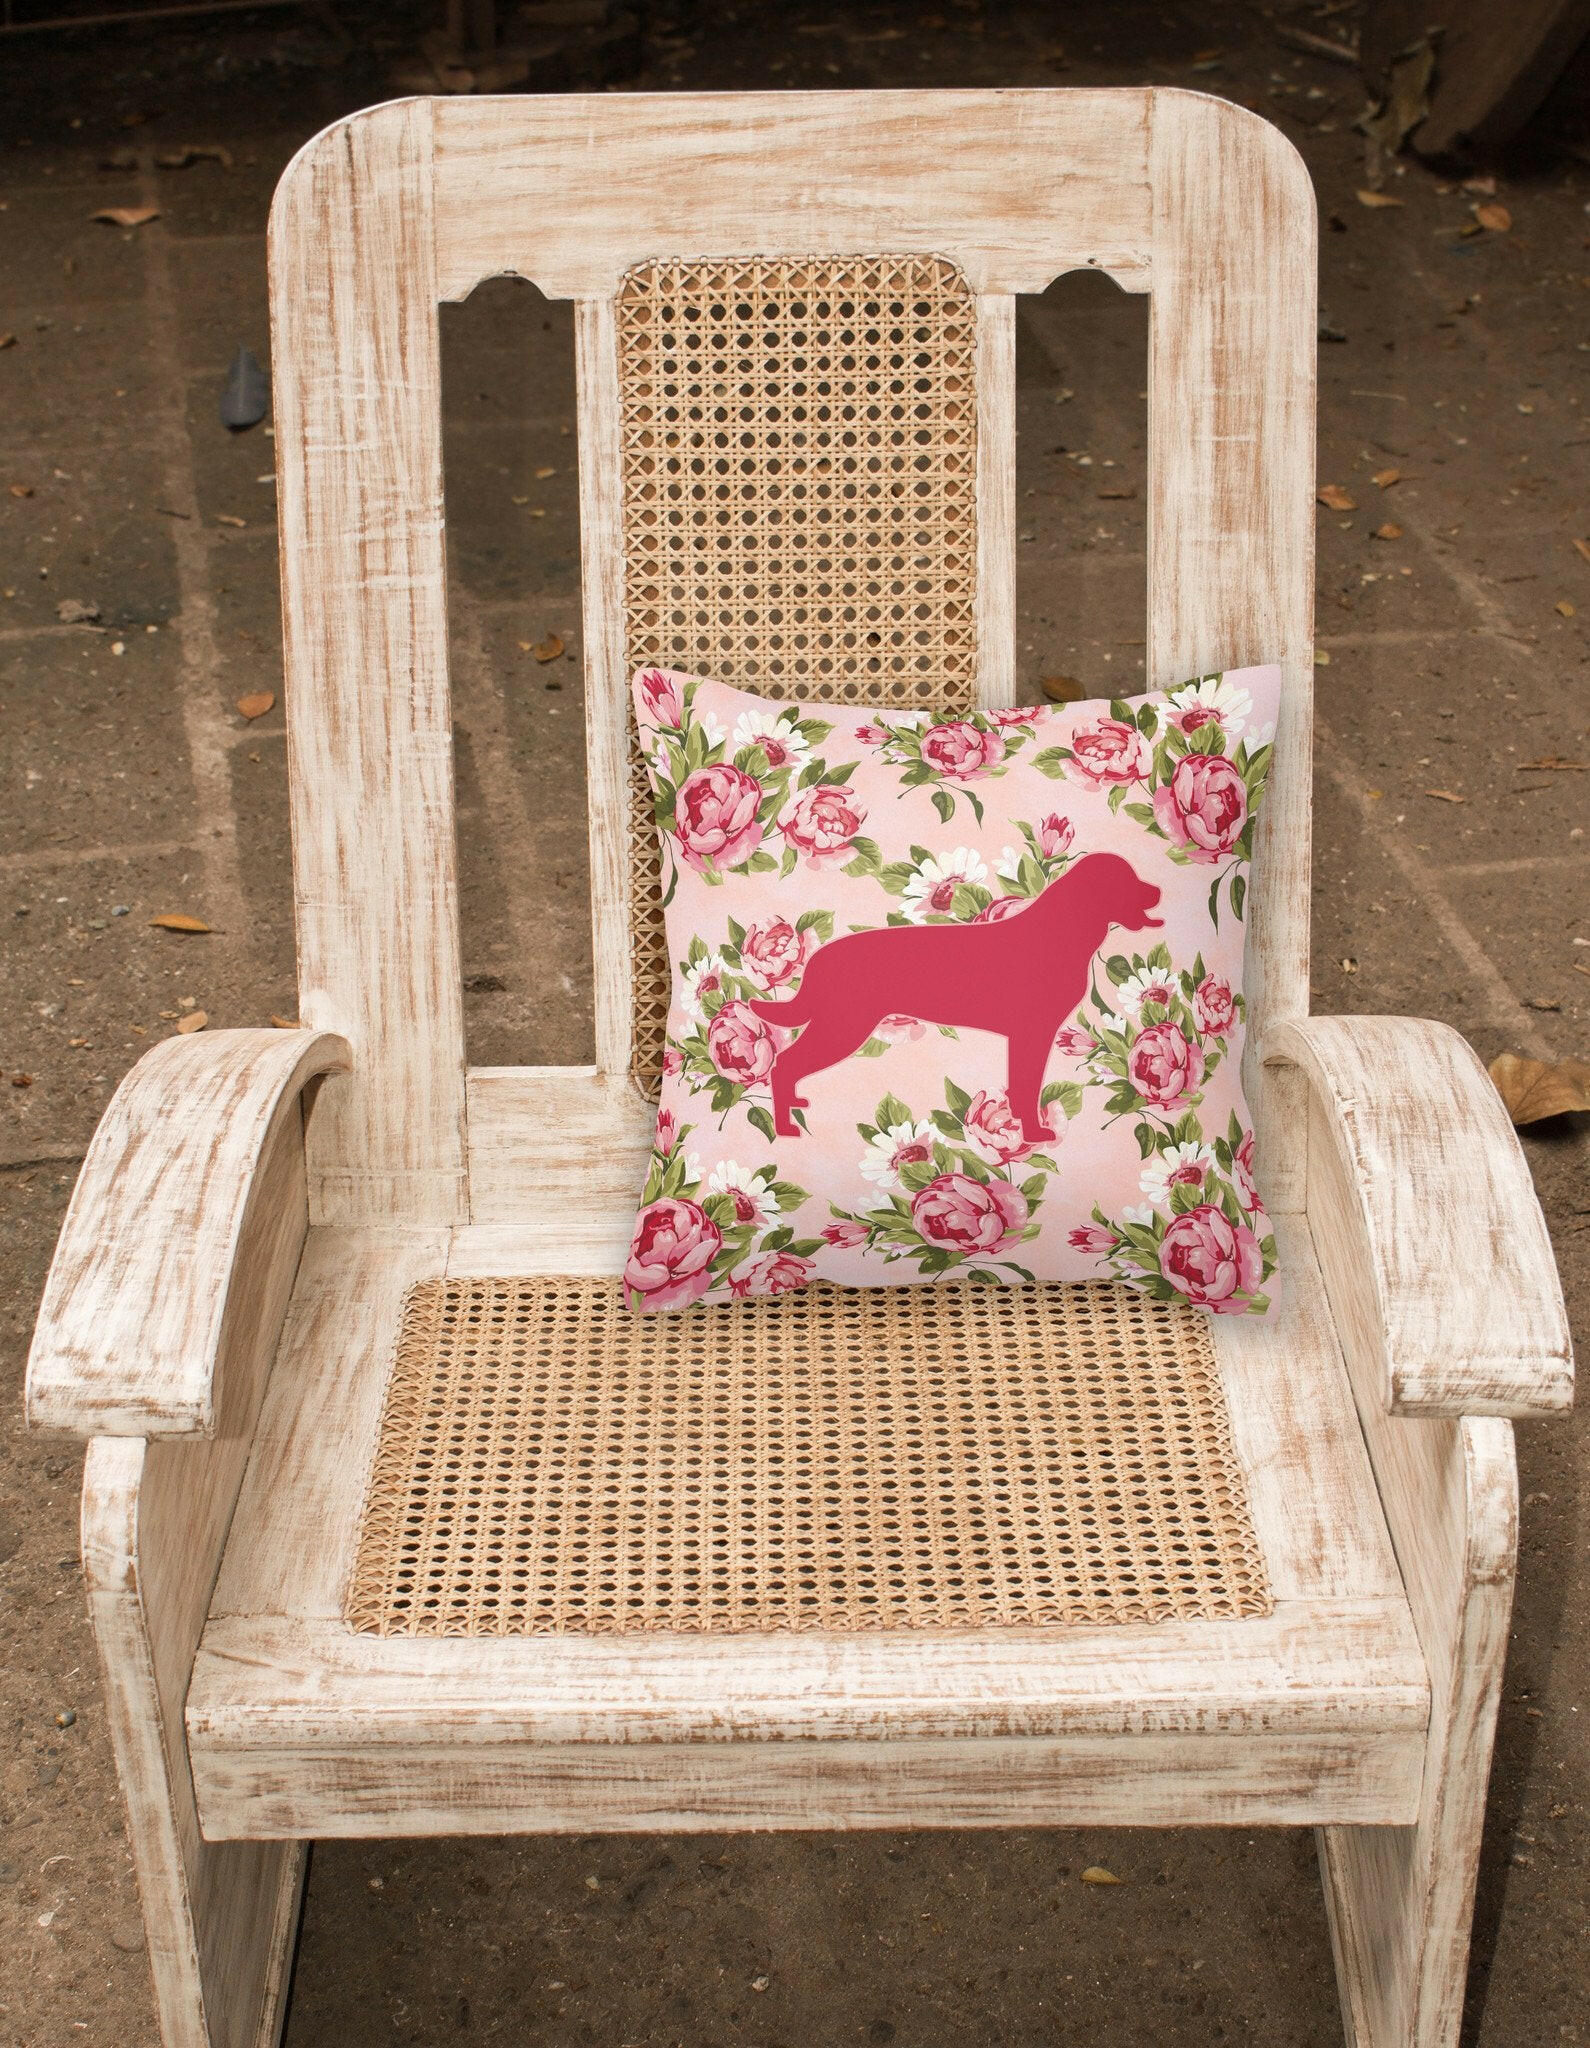 Labrador Shabby Chic Pink Roses  Fabric Decorative Pillow BB1111-RS-PK-PW1414 - the-store.com